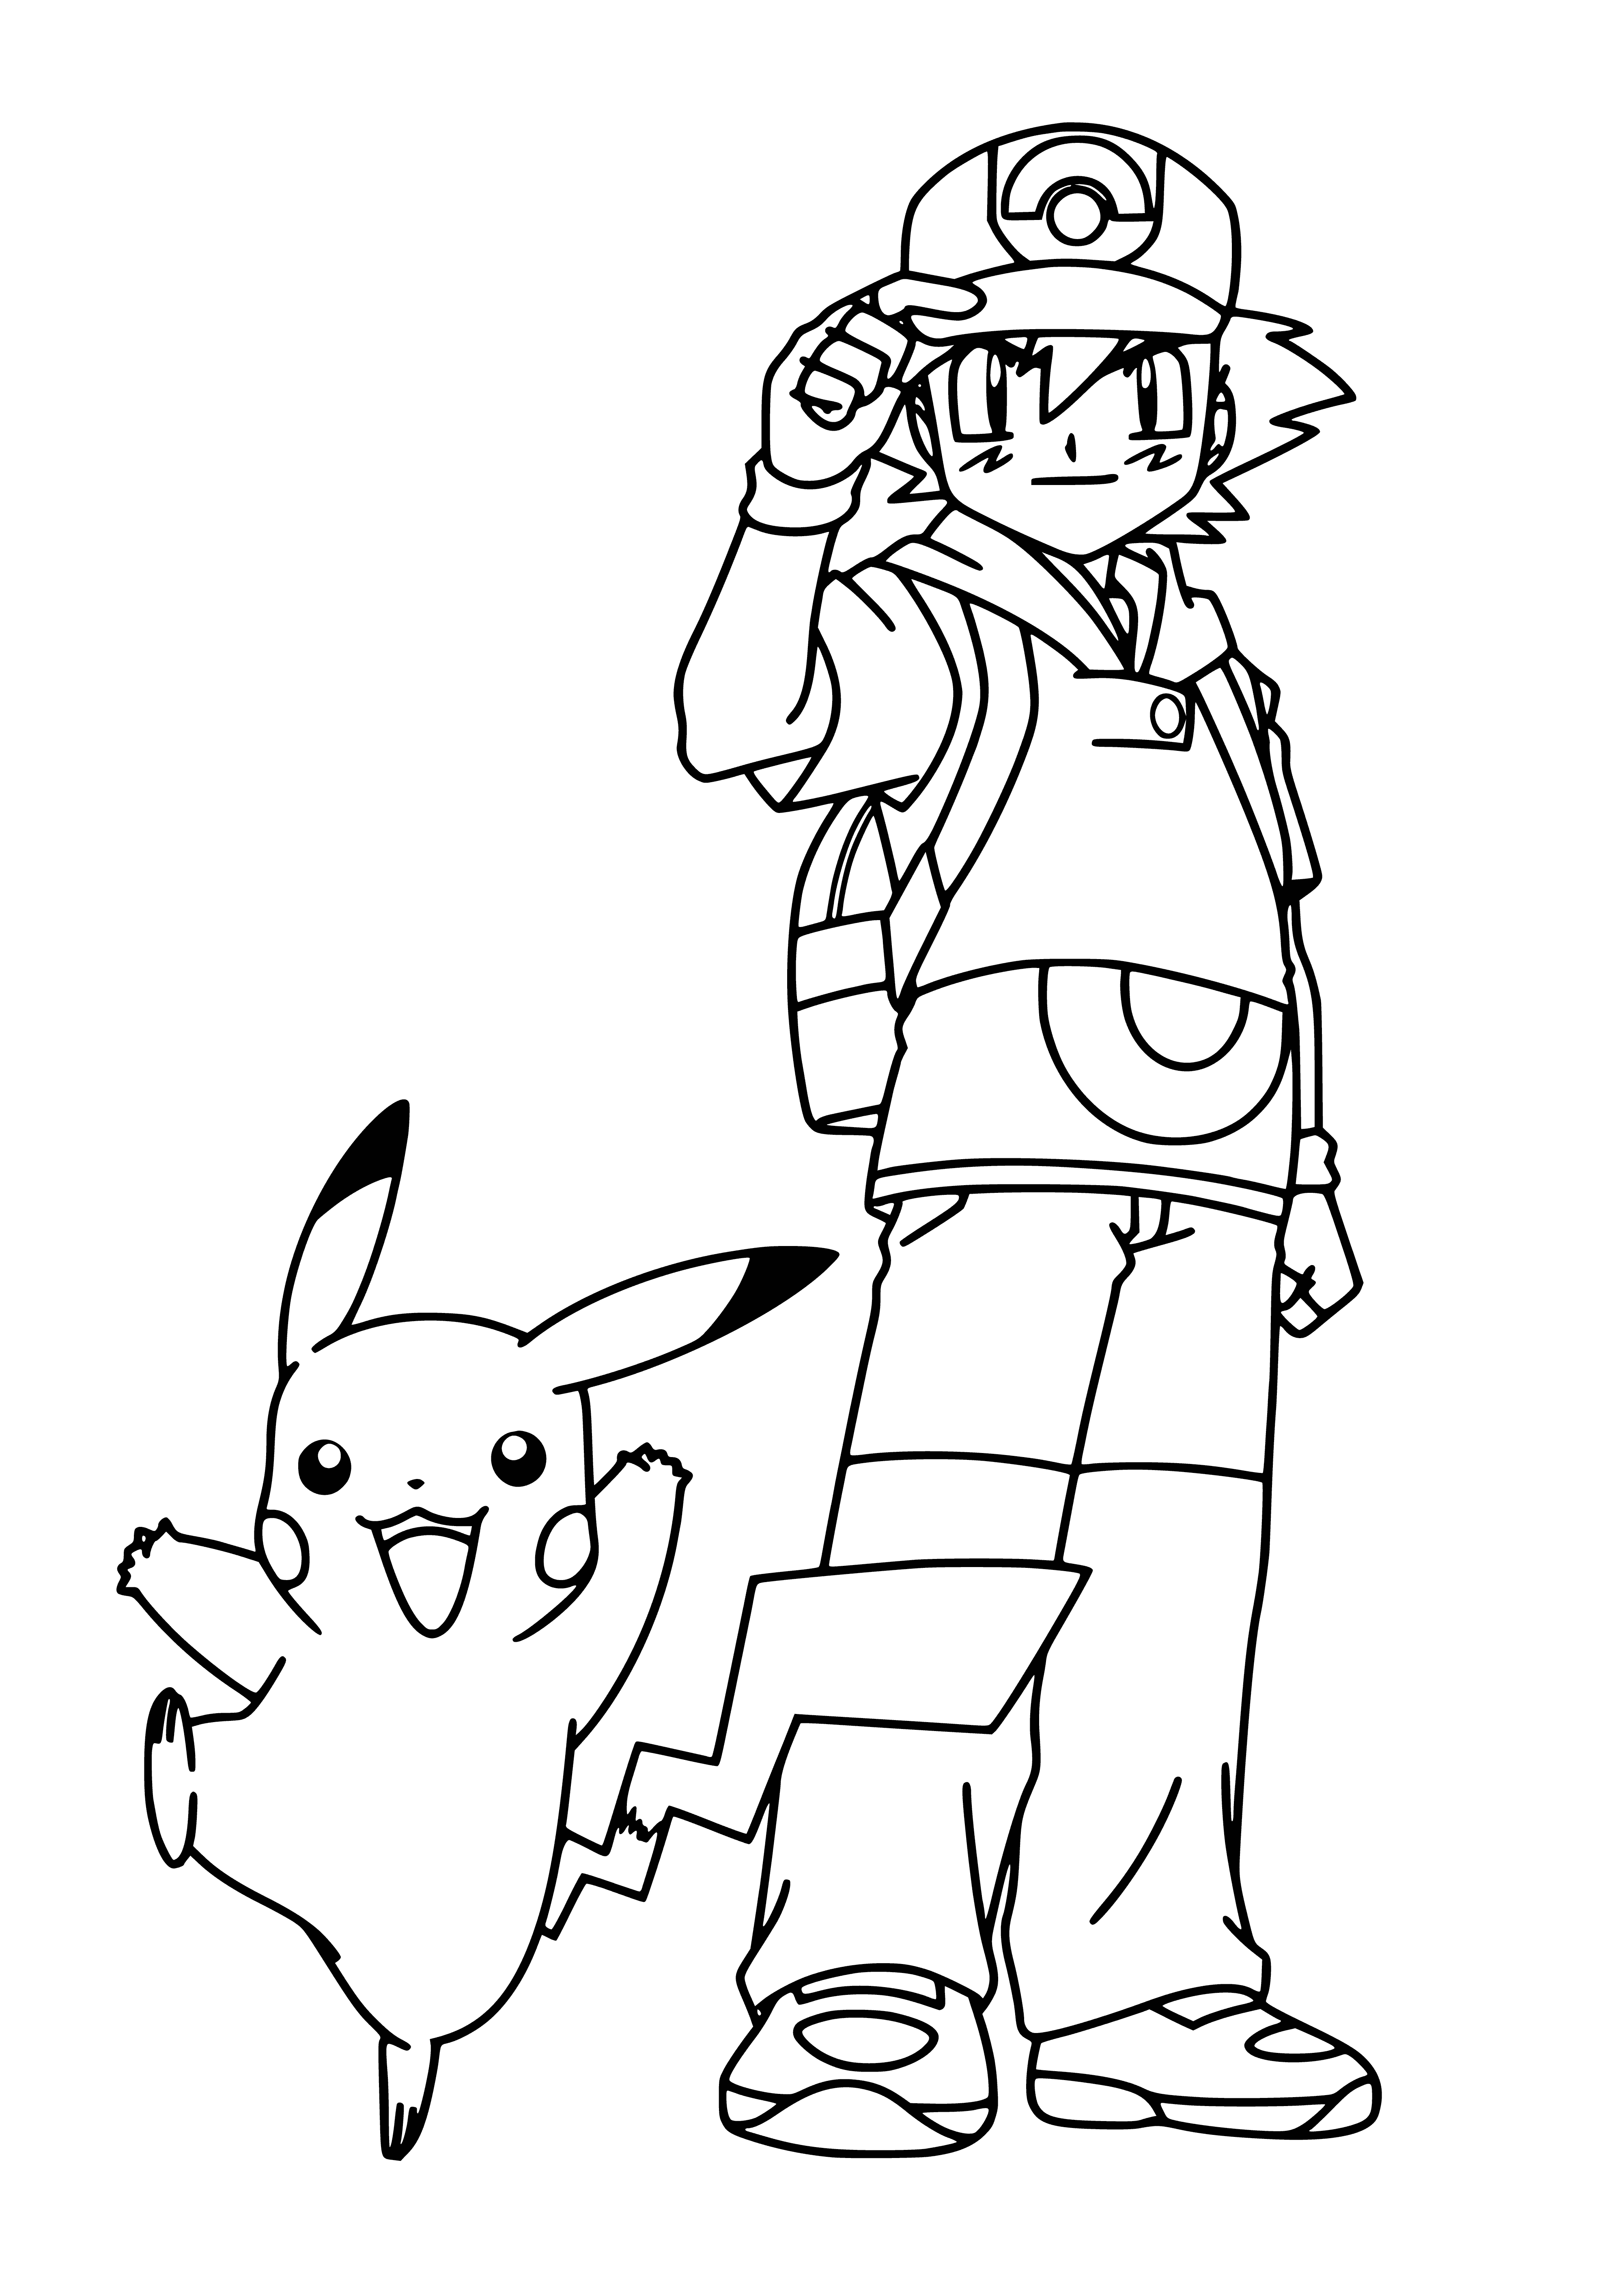 coloring page: Boy with spiky black hair stares determinedly at a yellow rat creature (Pikachu) on a coloring page.